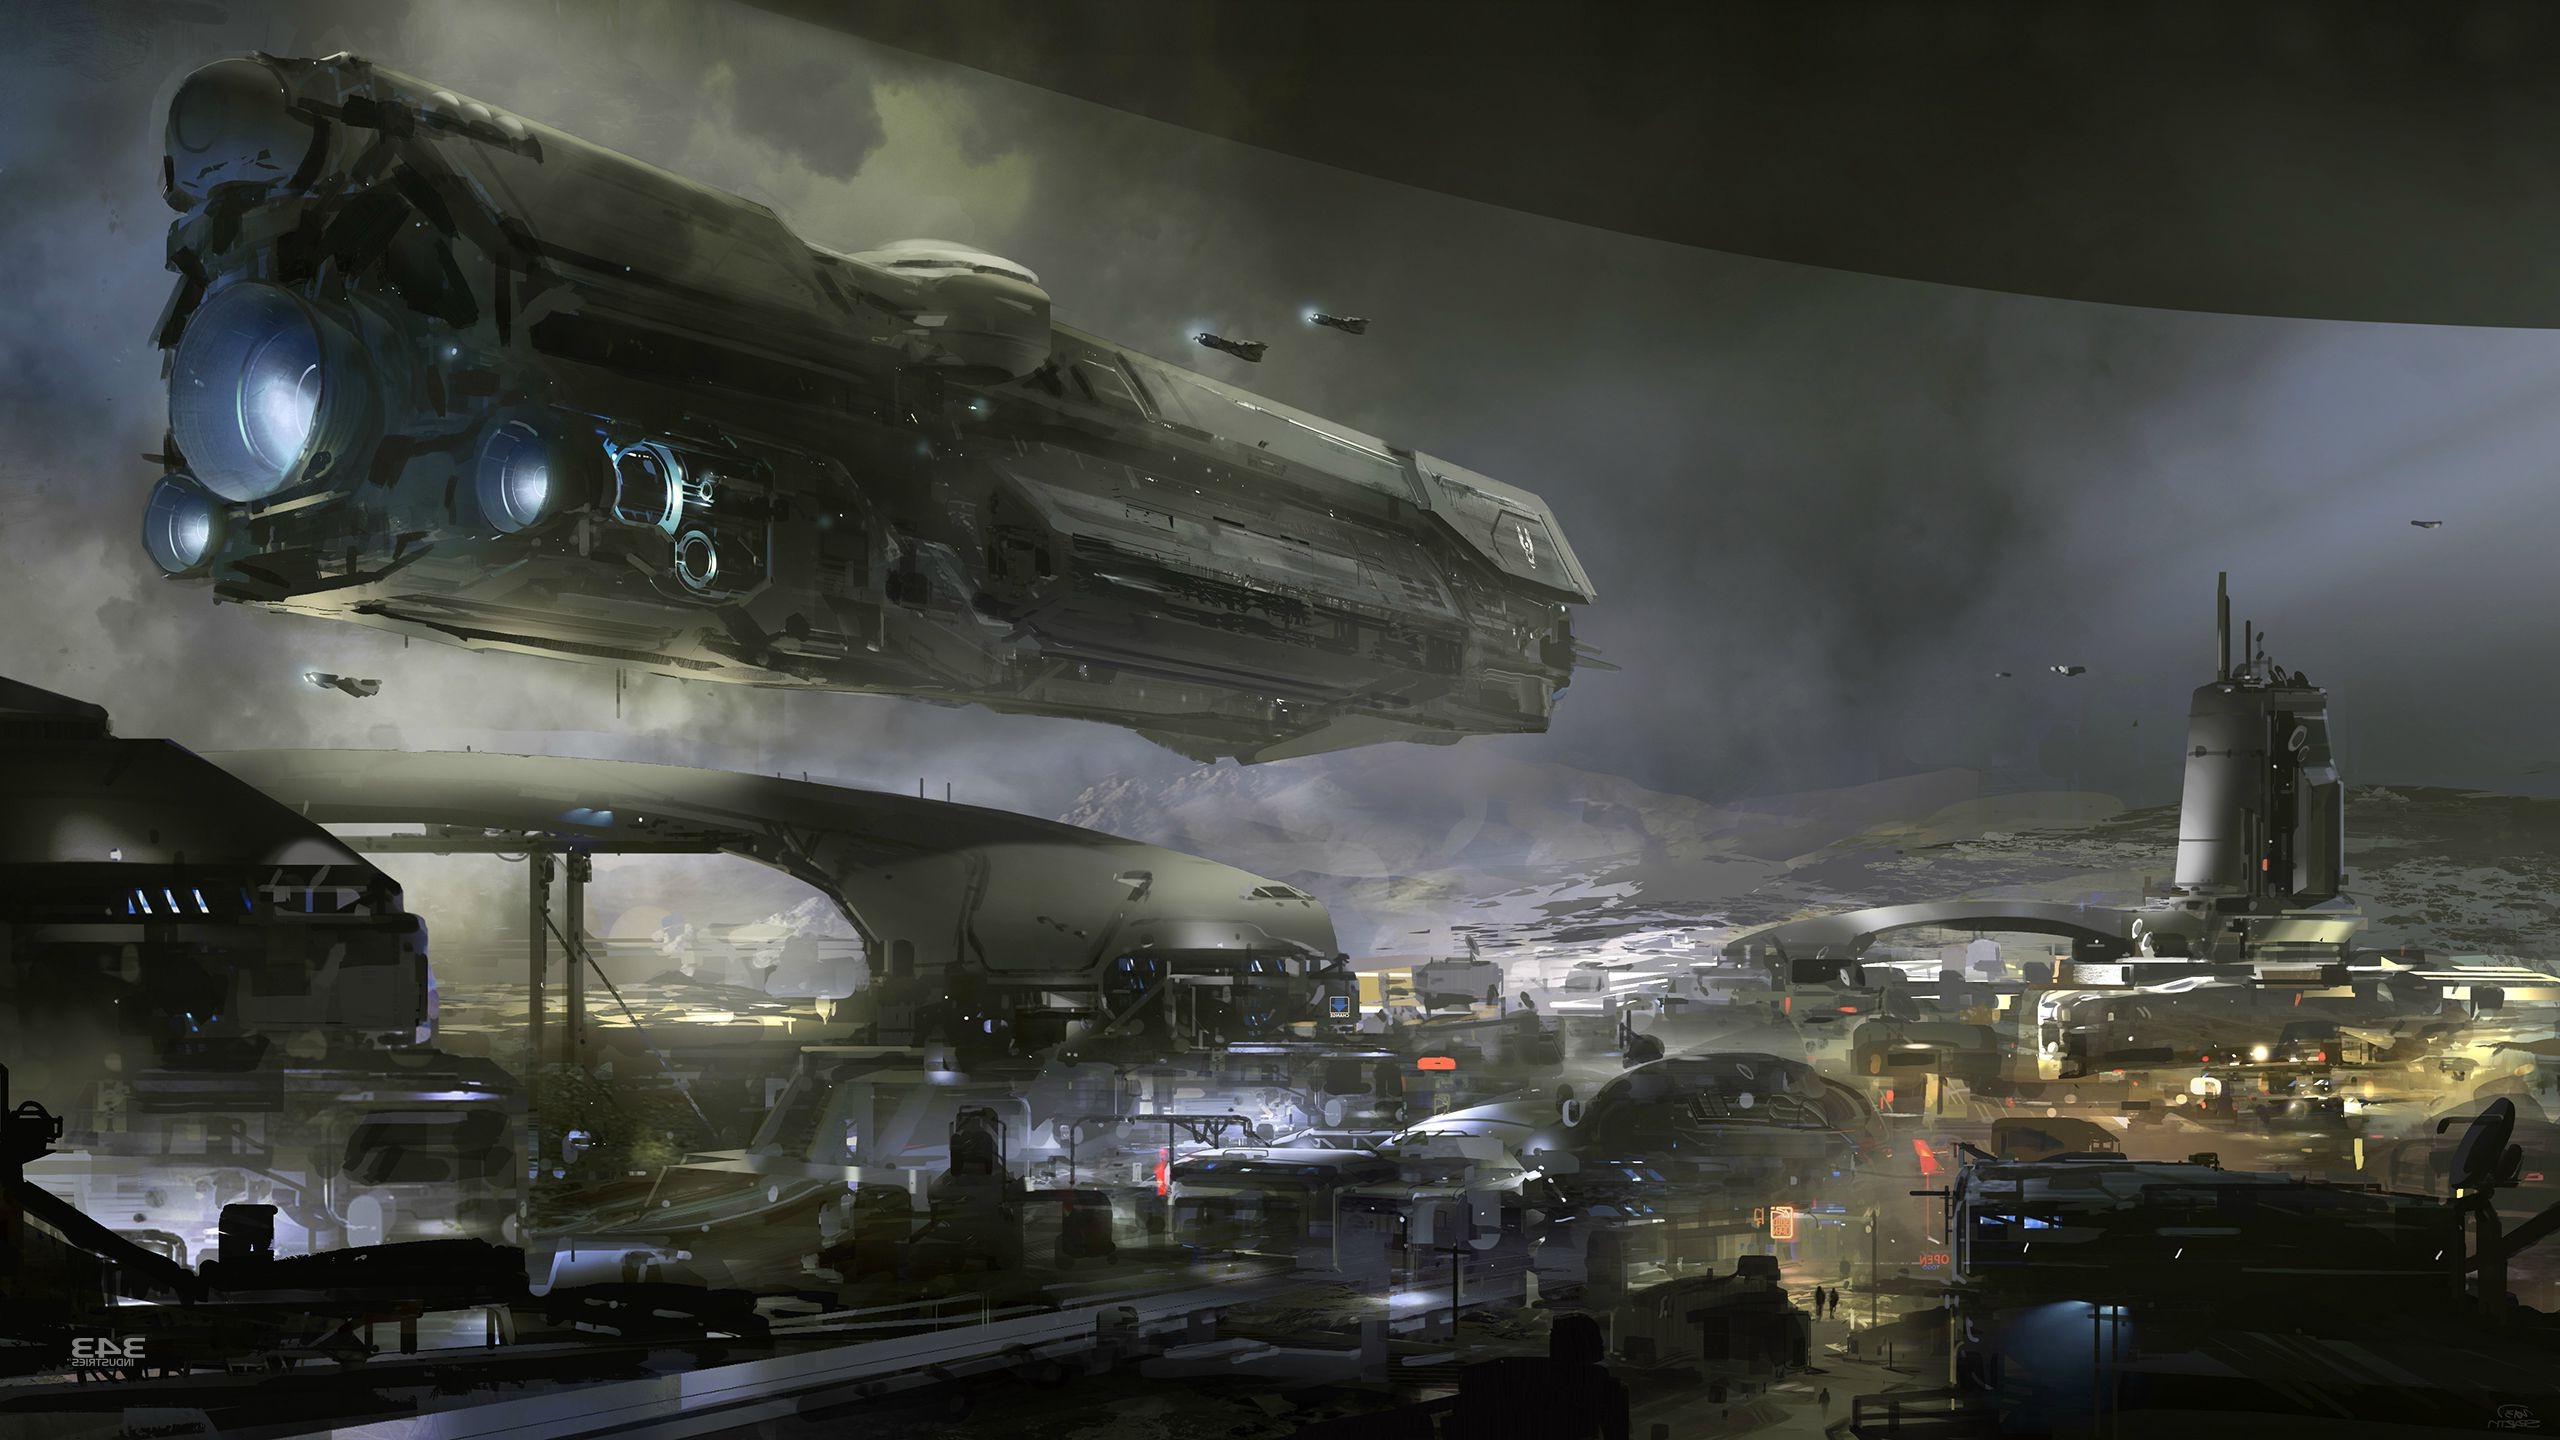 Halo Spaceship Unsc Infinity Digital Art Wallpapers Hd Desktop And Mobile Backgrounds